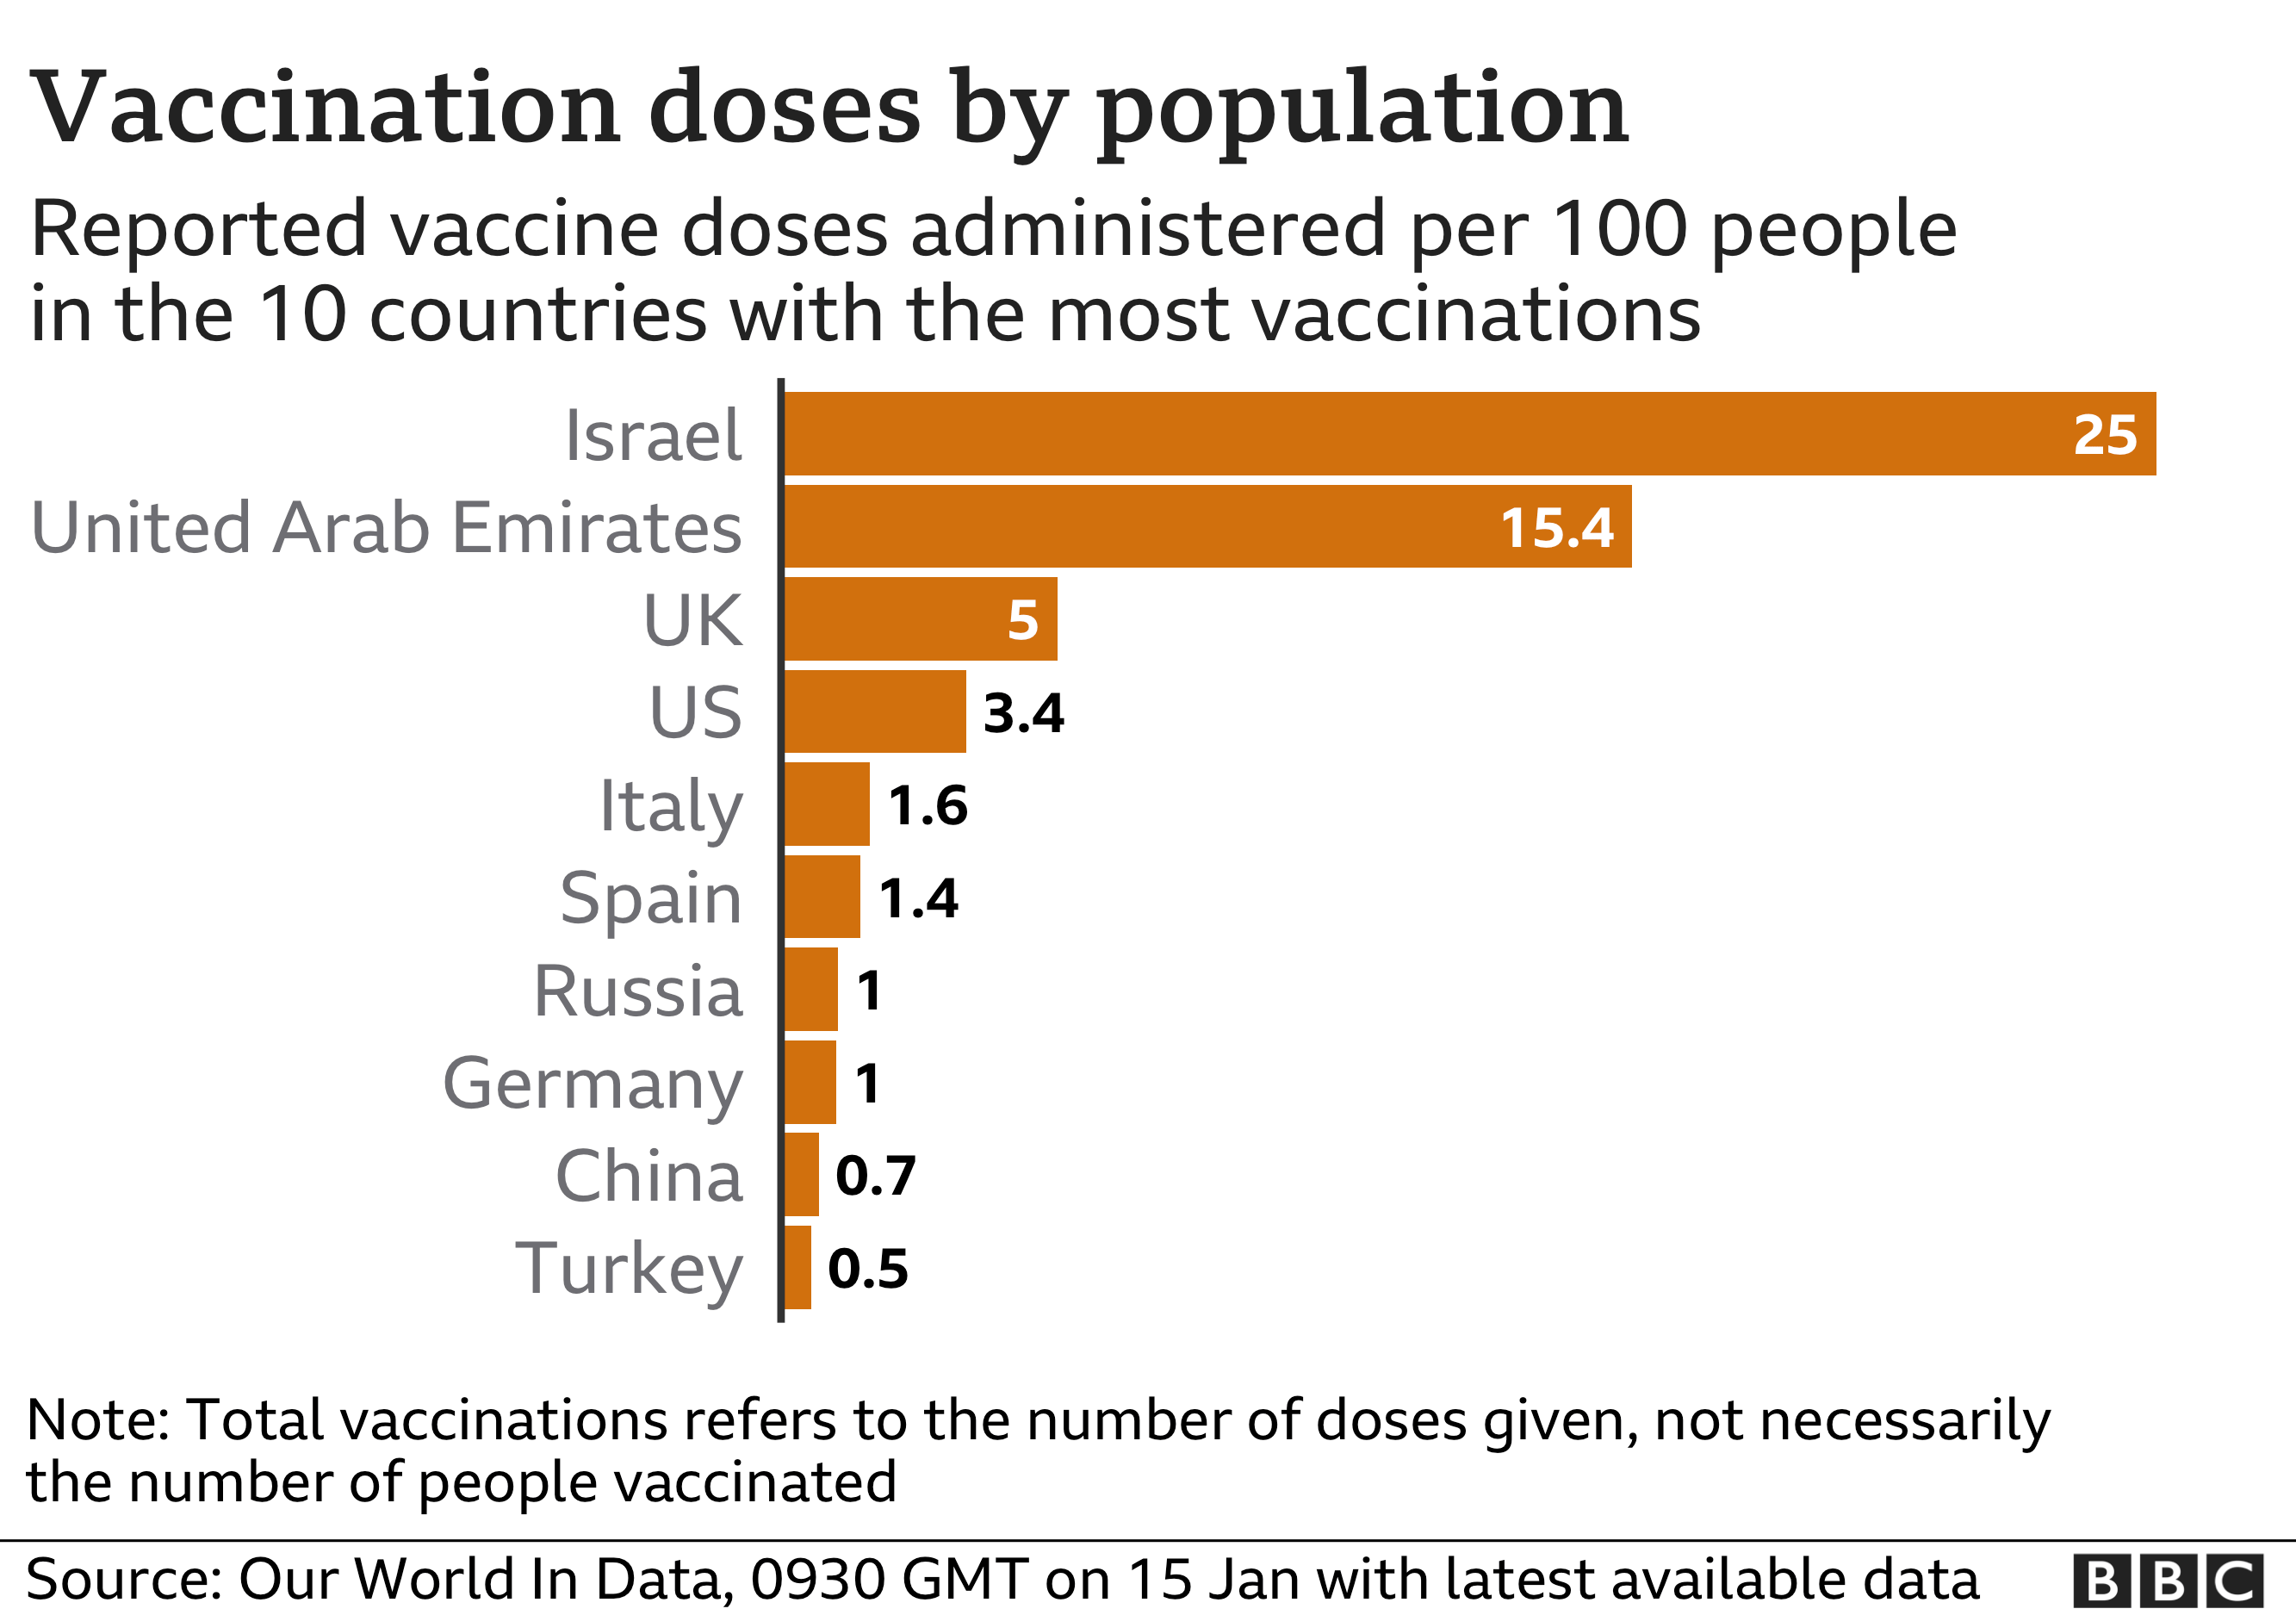 Chart shows doses administered per 100 people in 10 countries with most vaccinations